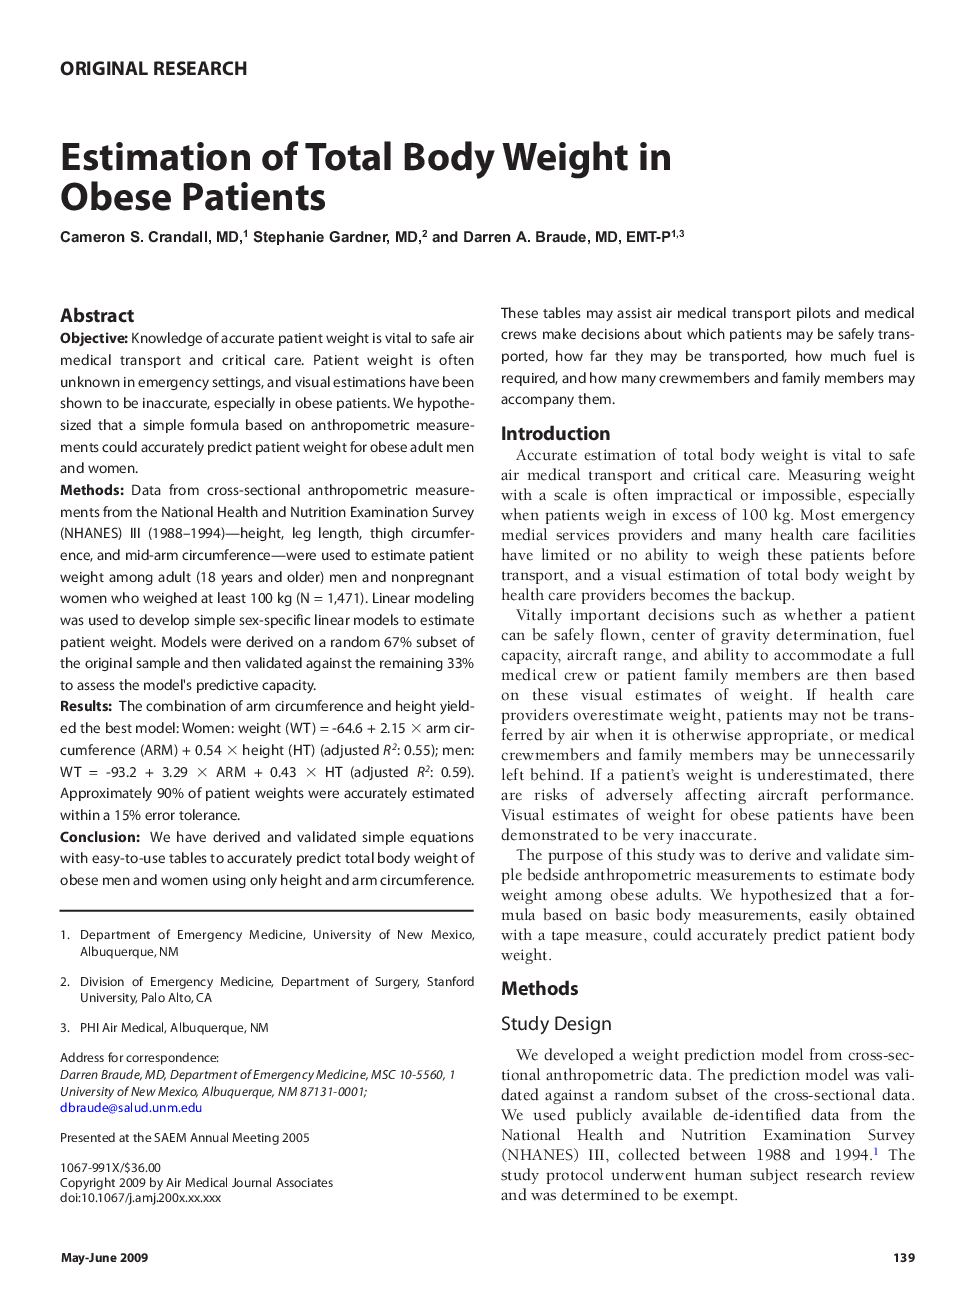 Estimation of Total Body Weight in Obese Patients 